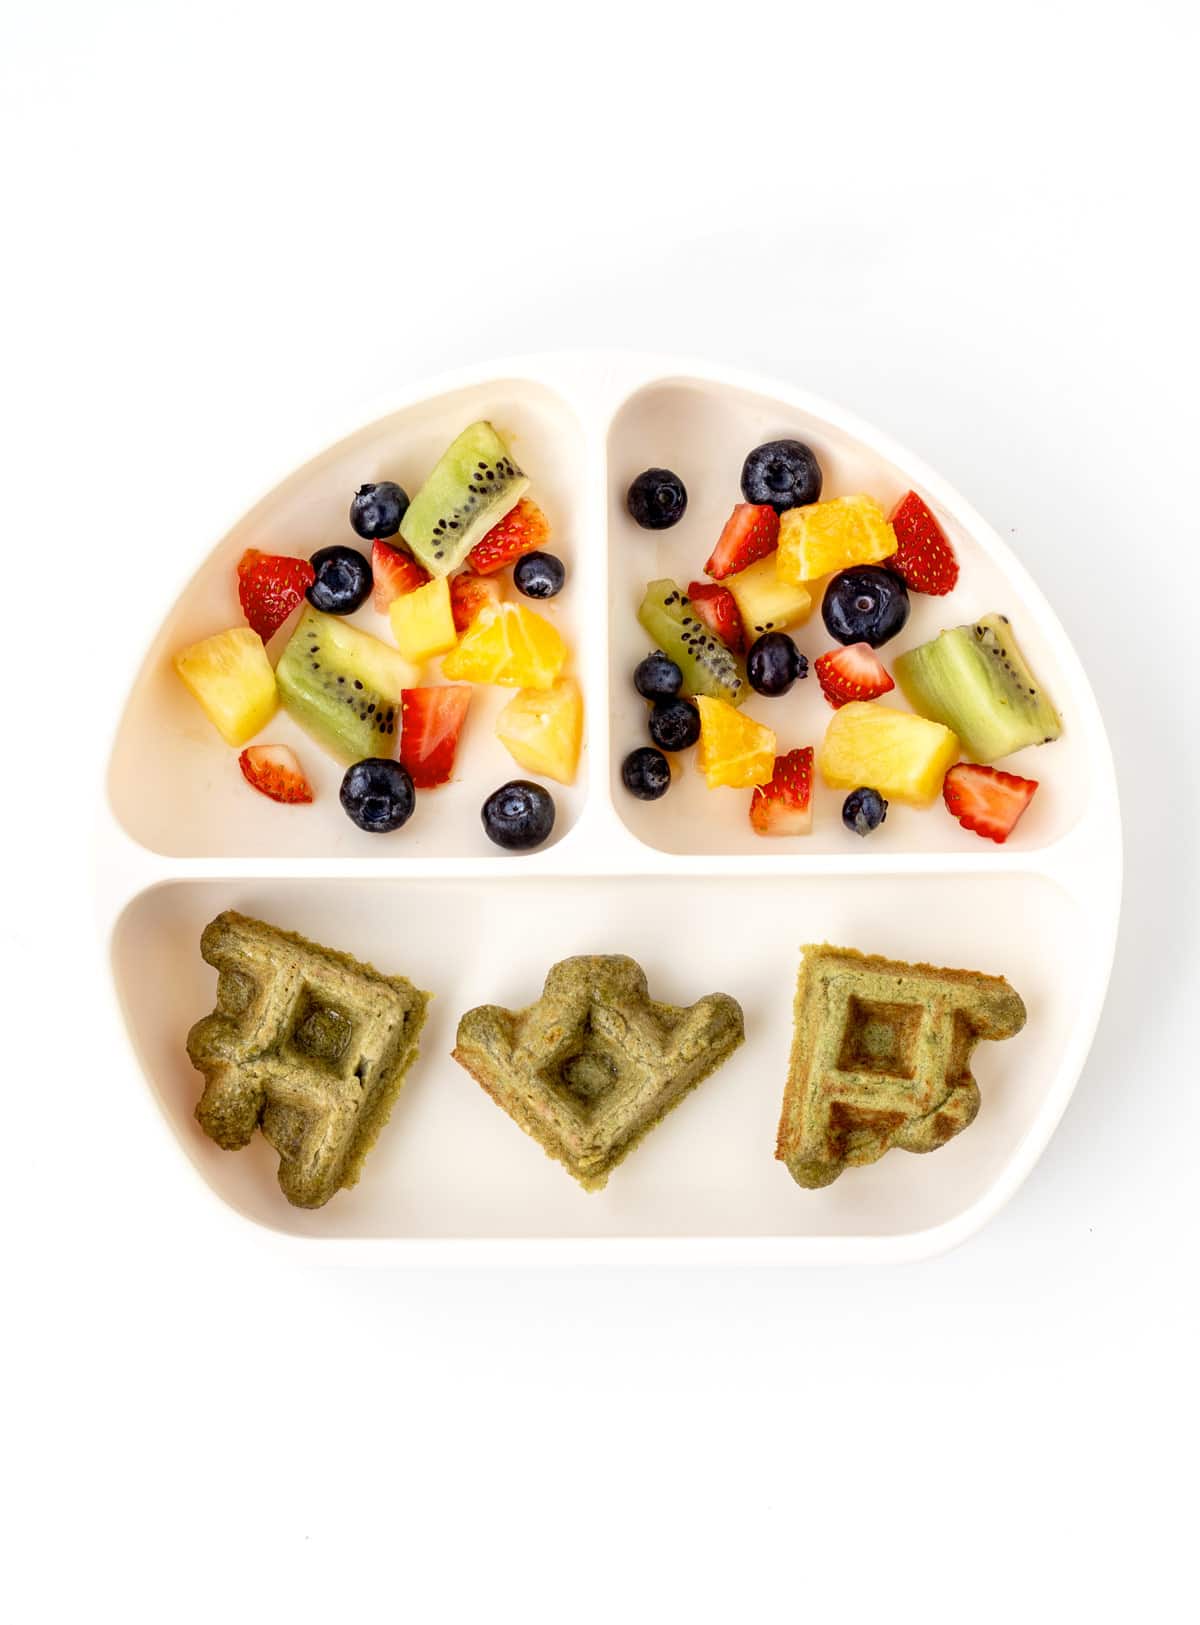 A divided plate with a cut banana spinach waffle and mixed fruit.